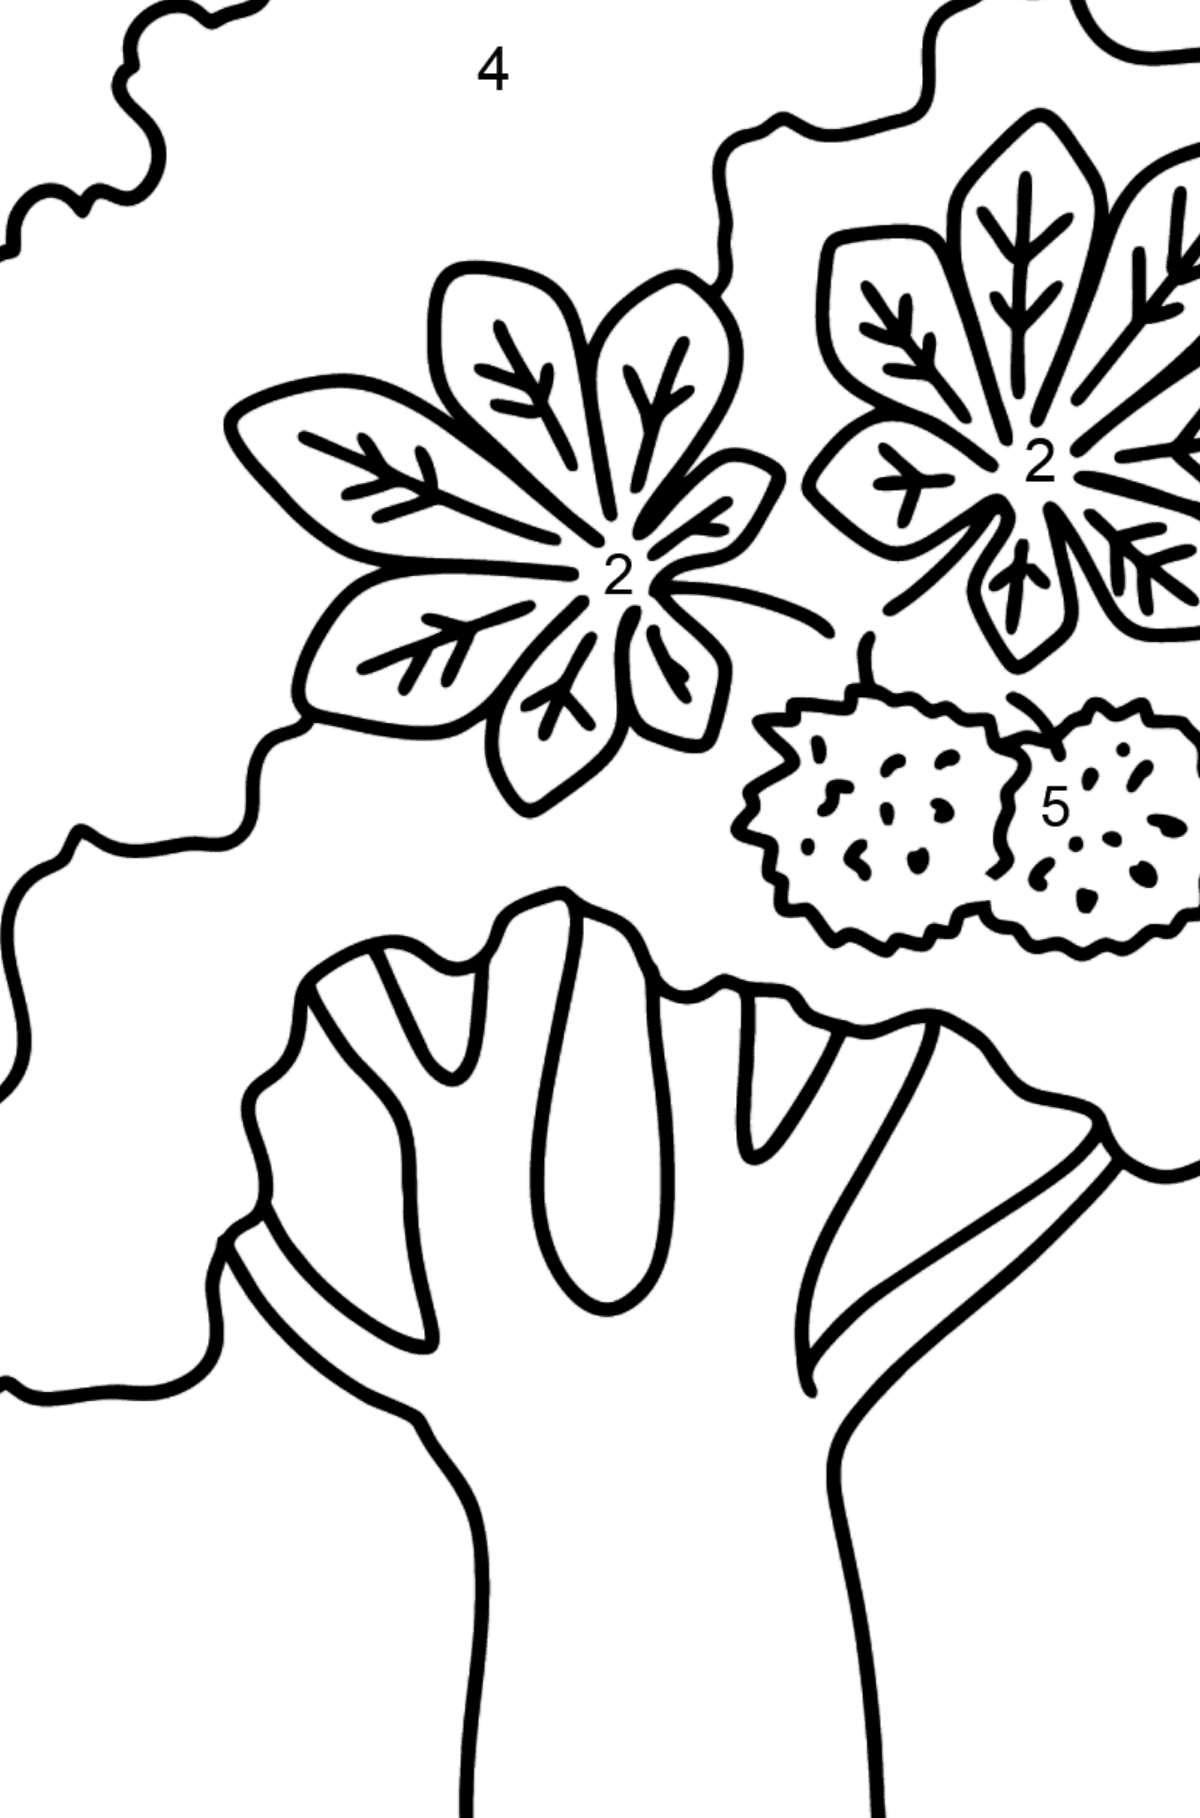 Chestnut coloring page - Coloring by Numbers for Kids